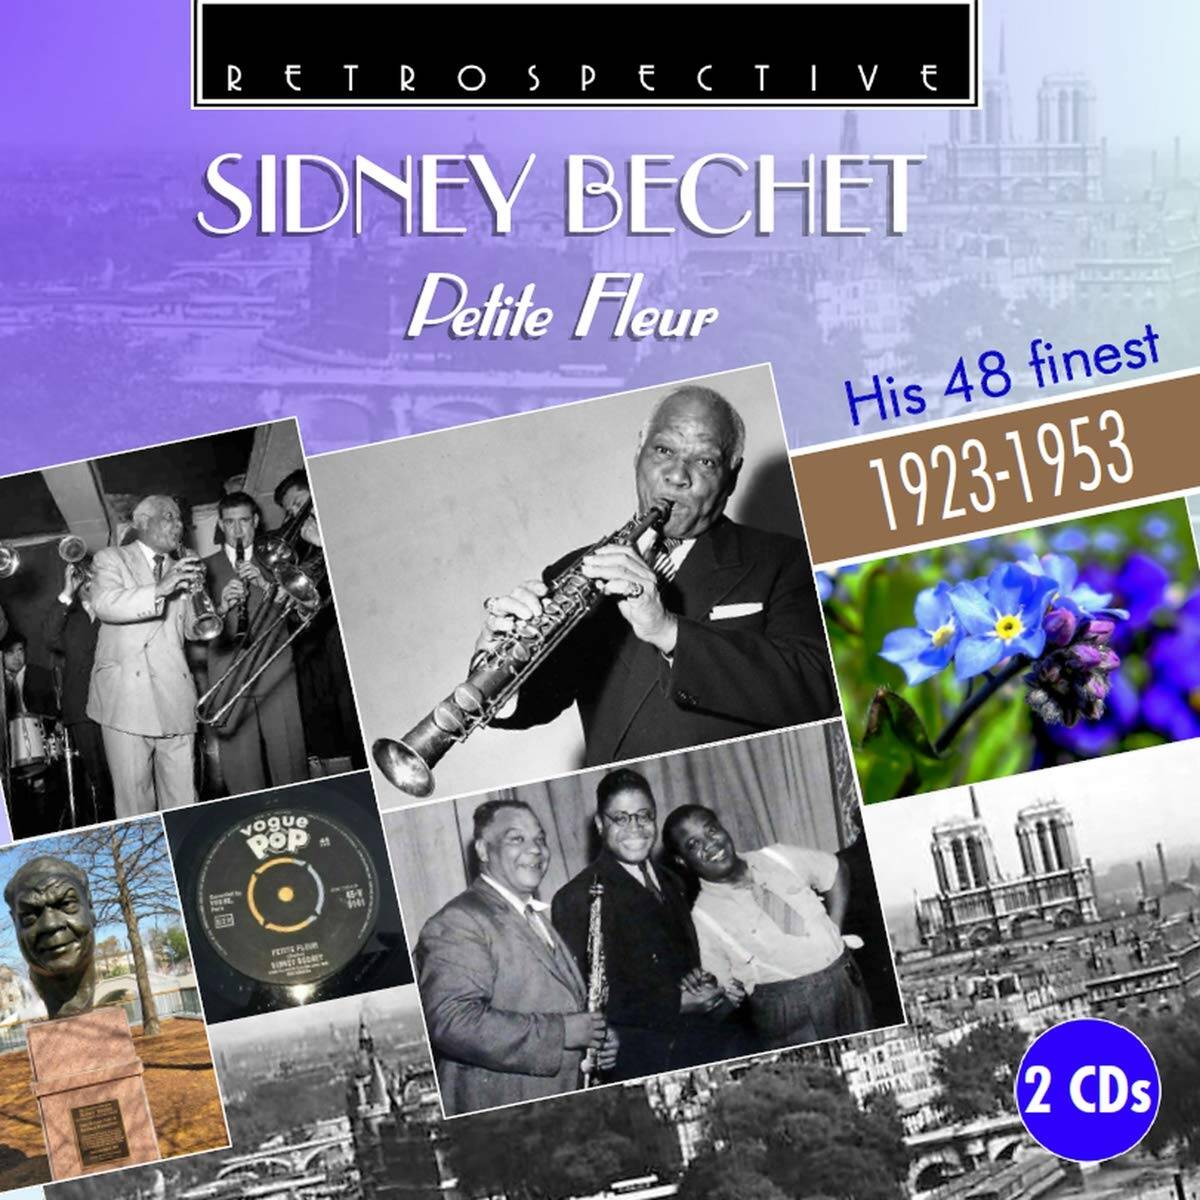 Sidney Bechet Petite Fleur His 48 Finest The Syncopated Times